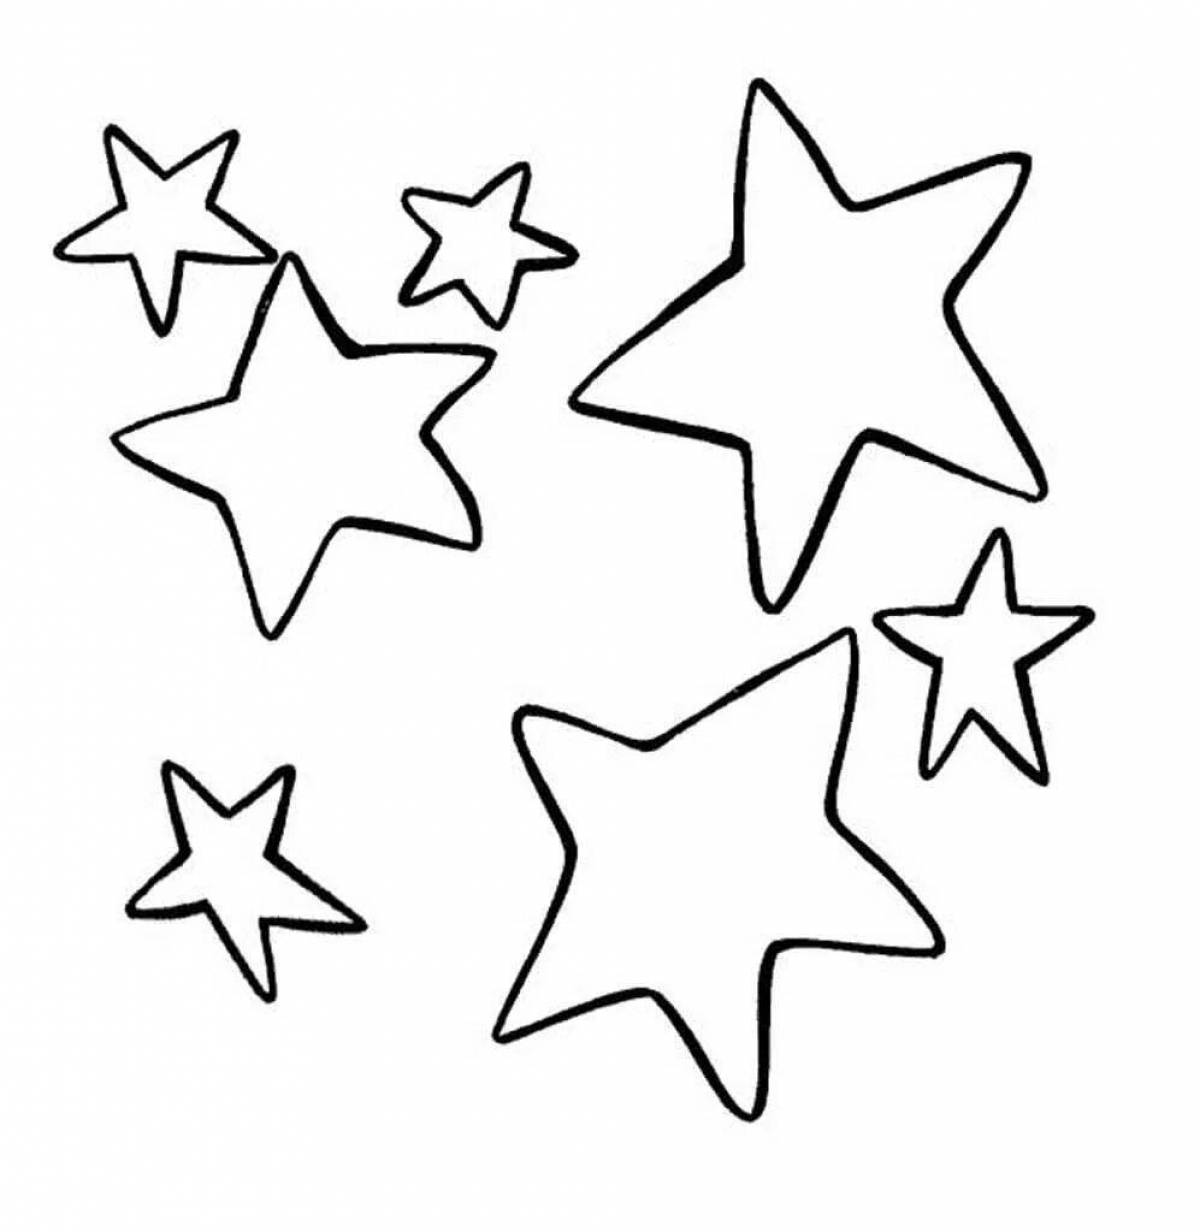 Adorable little stars coloring page